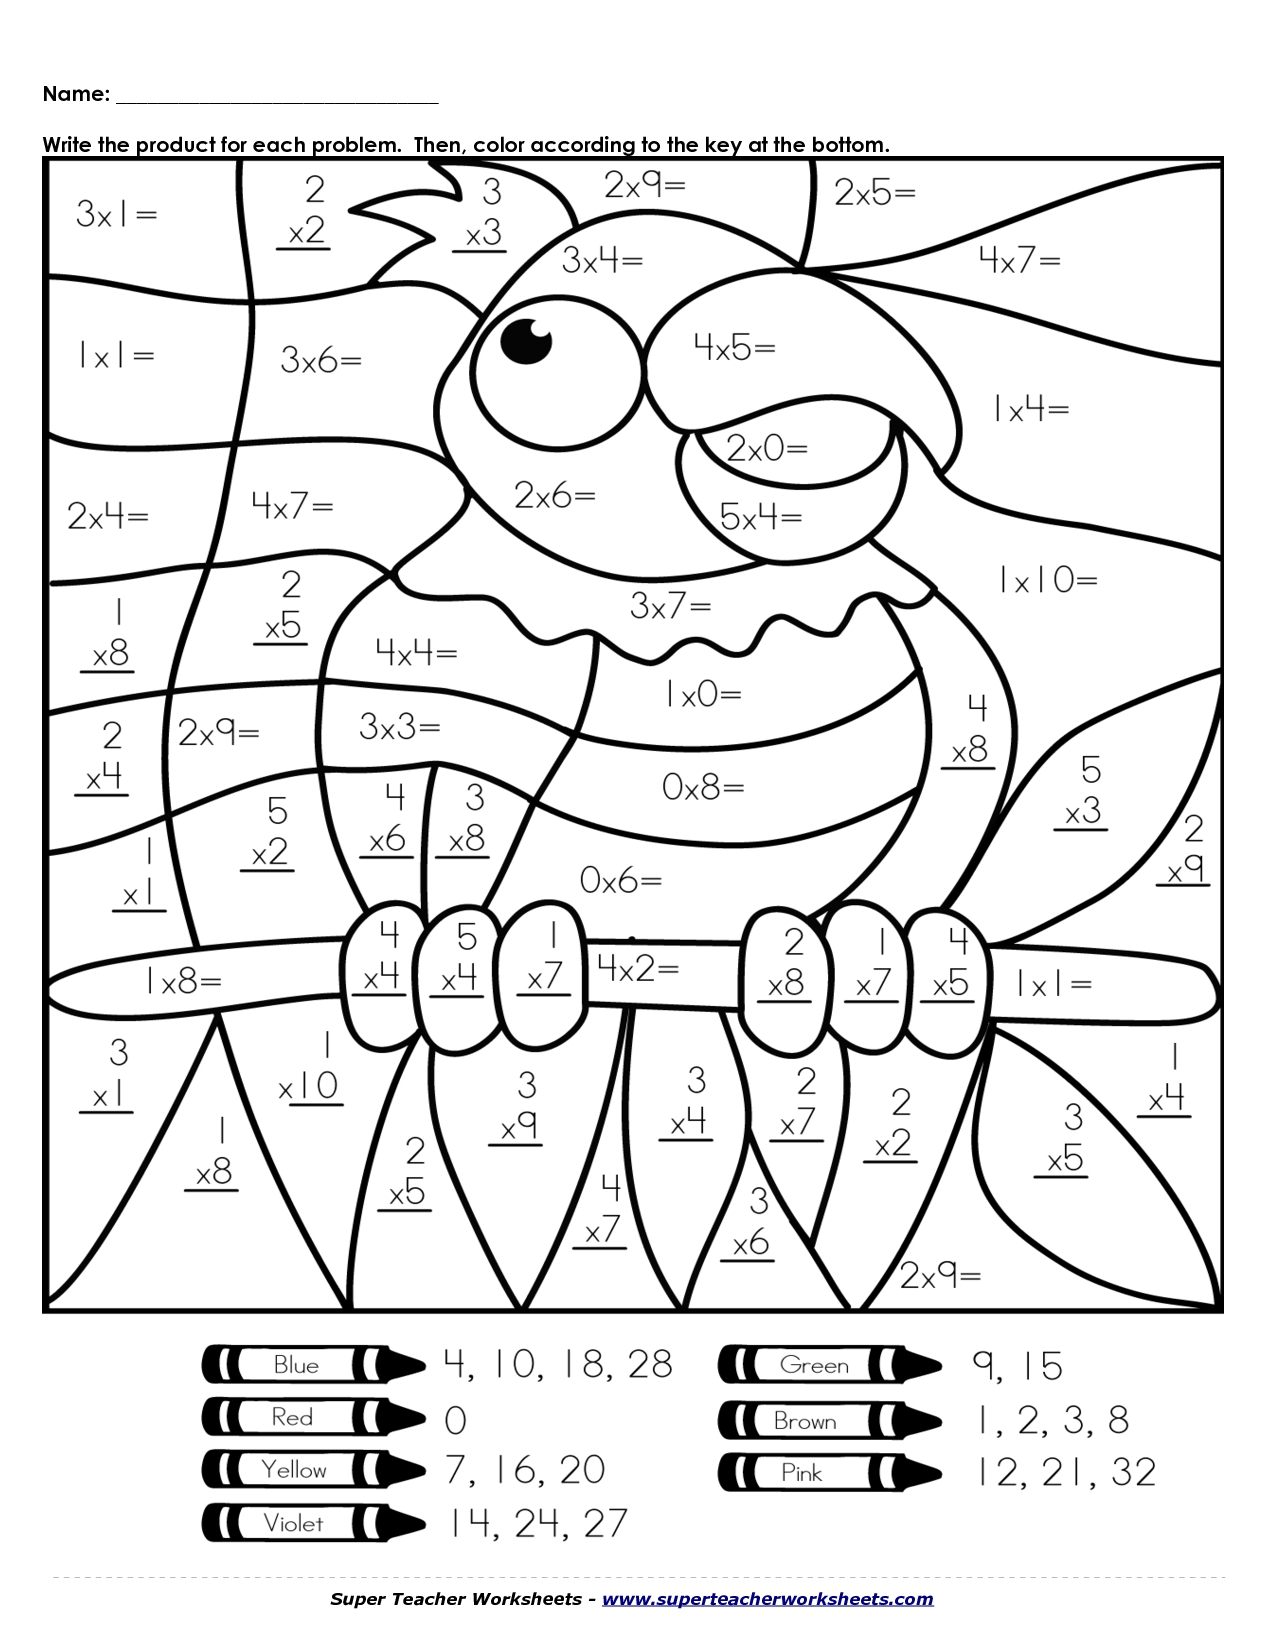 includes-45-count-worksheets-learning-numbers-and-math-printable